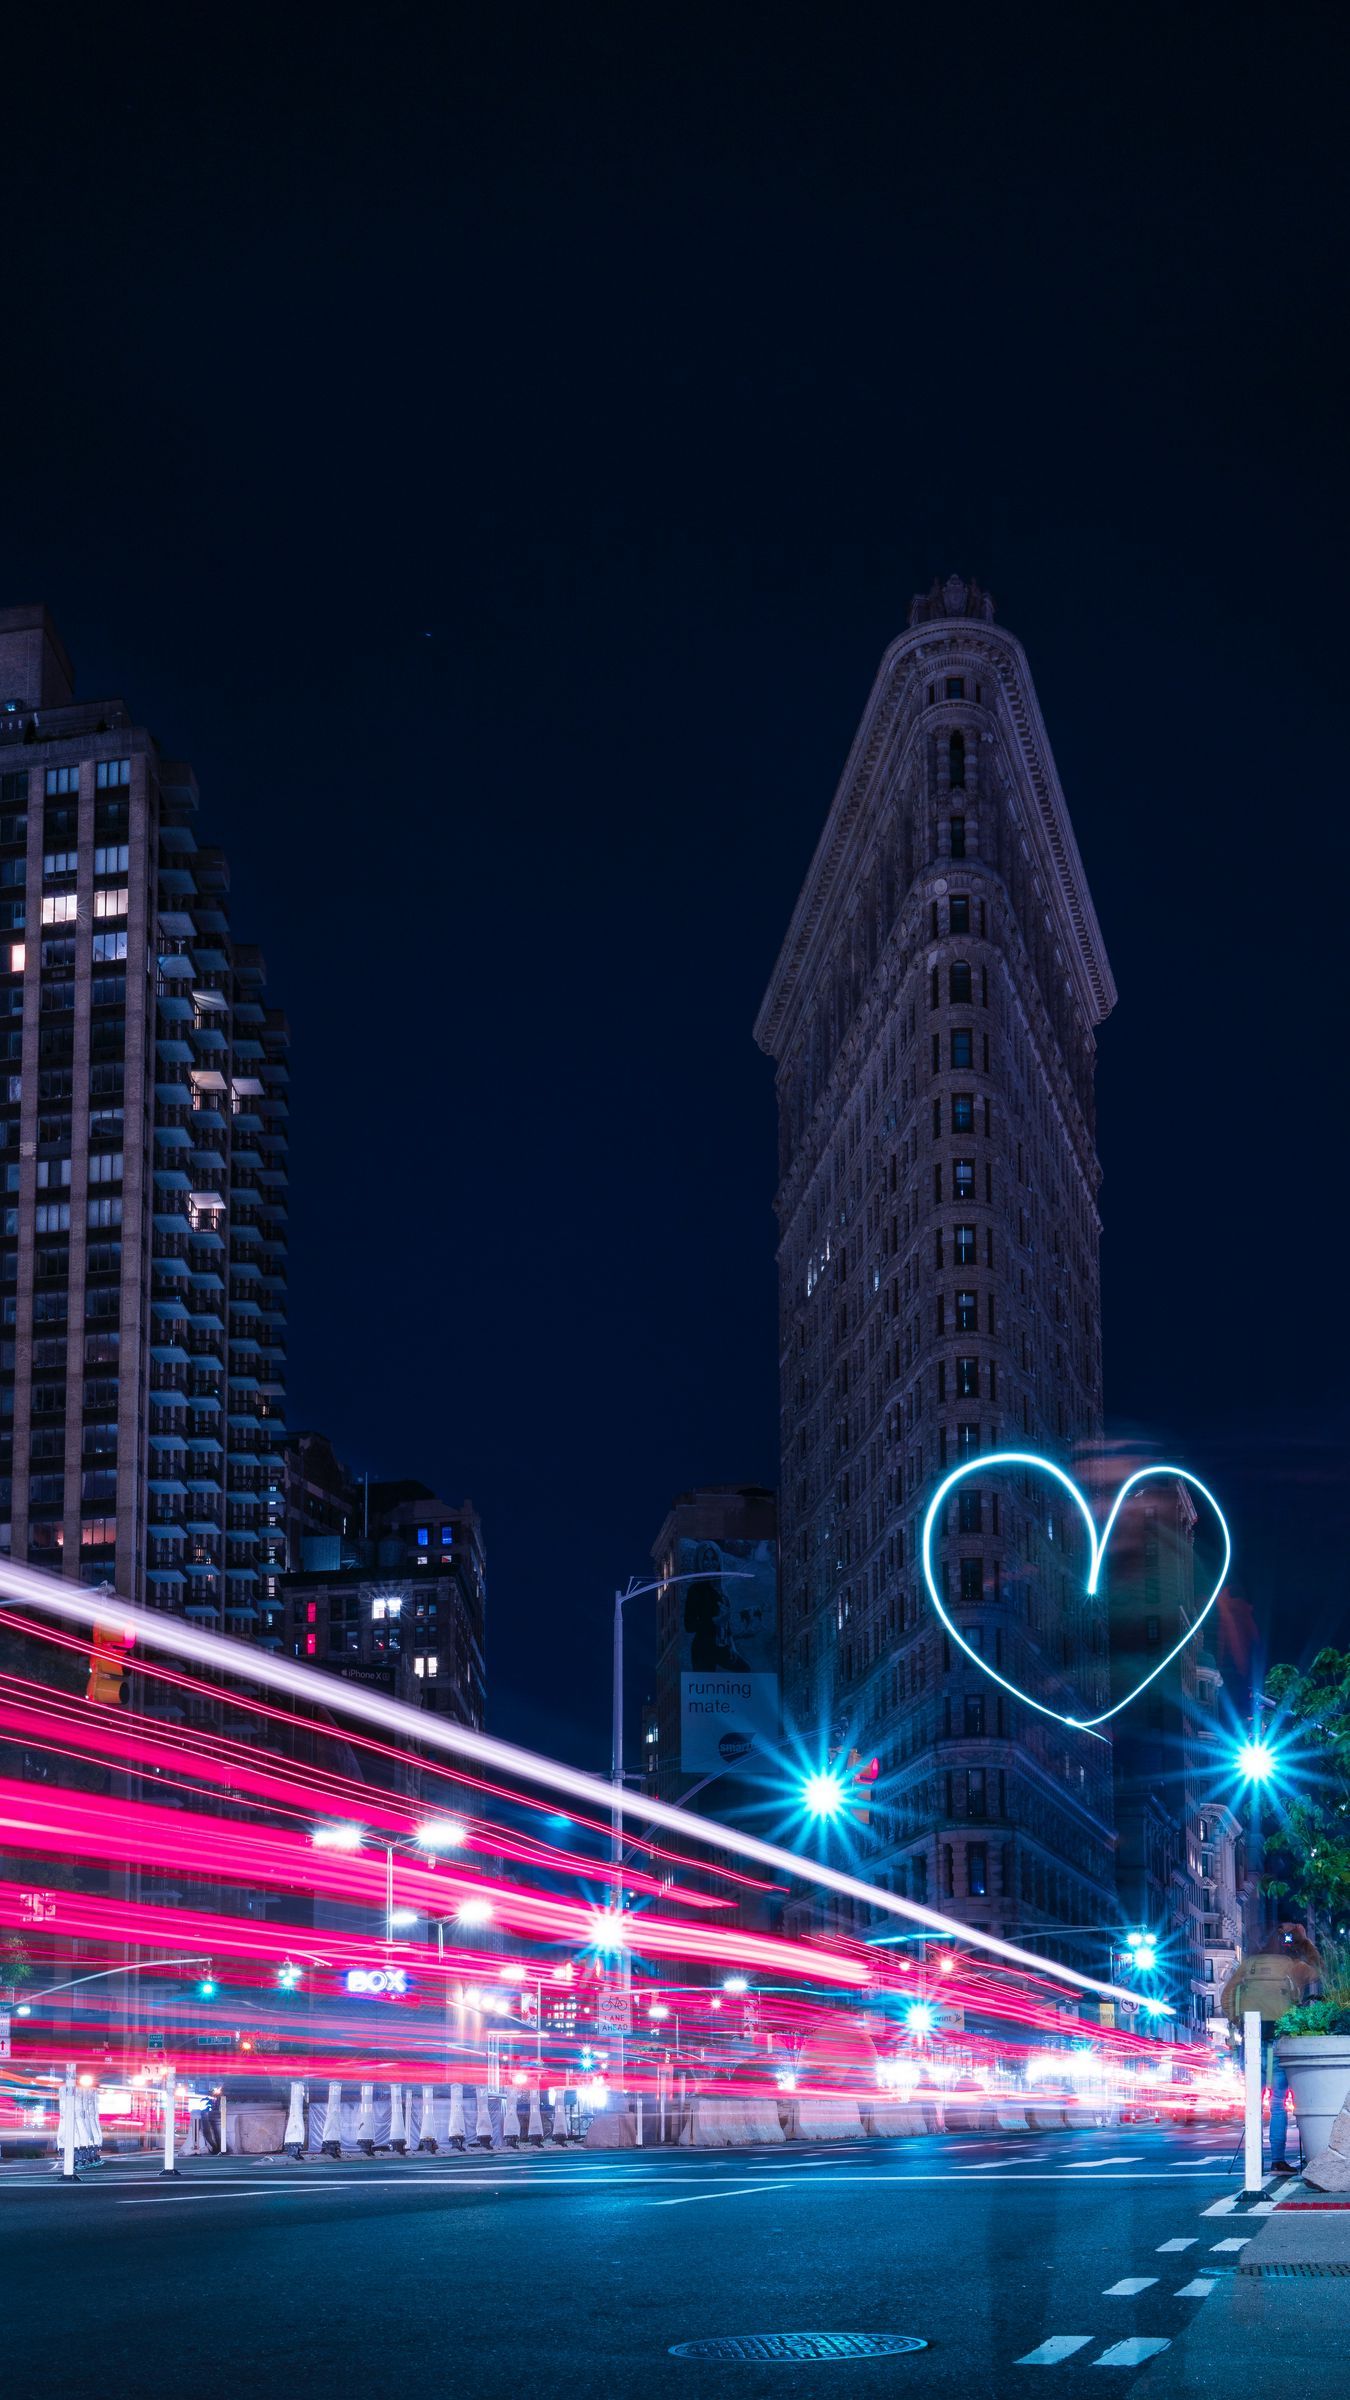 Download wallpaper 1350x2400 night city, long exposure, architecture, night, heart, new york, usa iphone 8+/7+/6s+/for parallax HD background